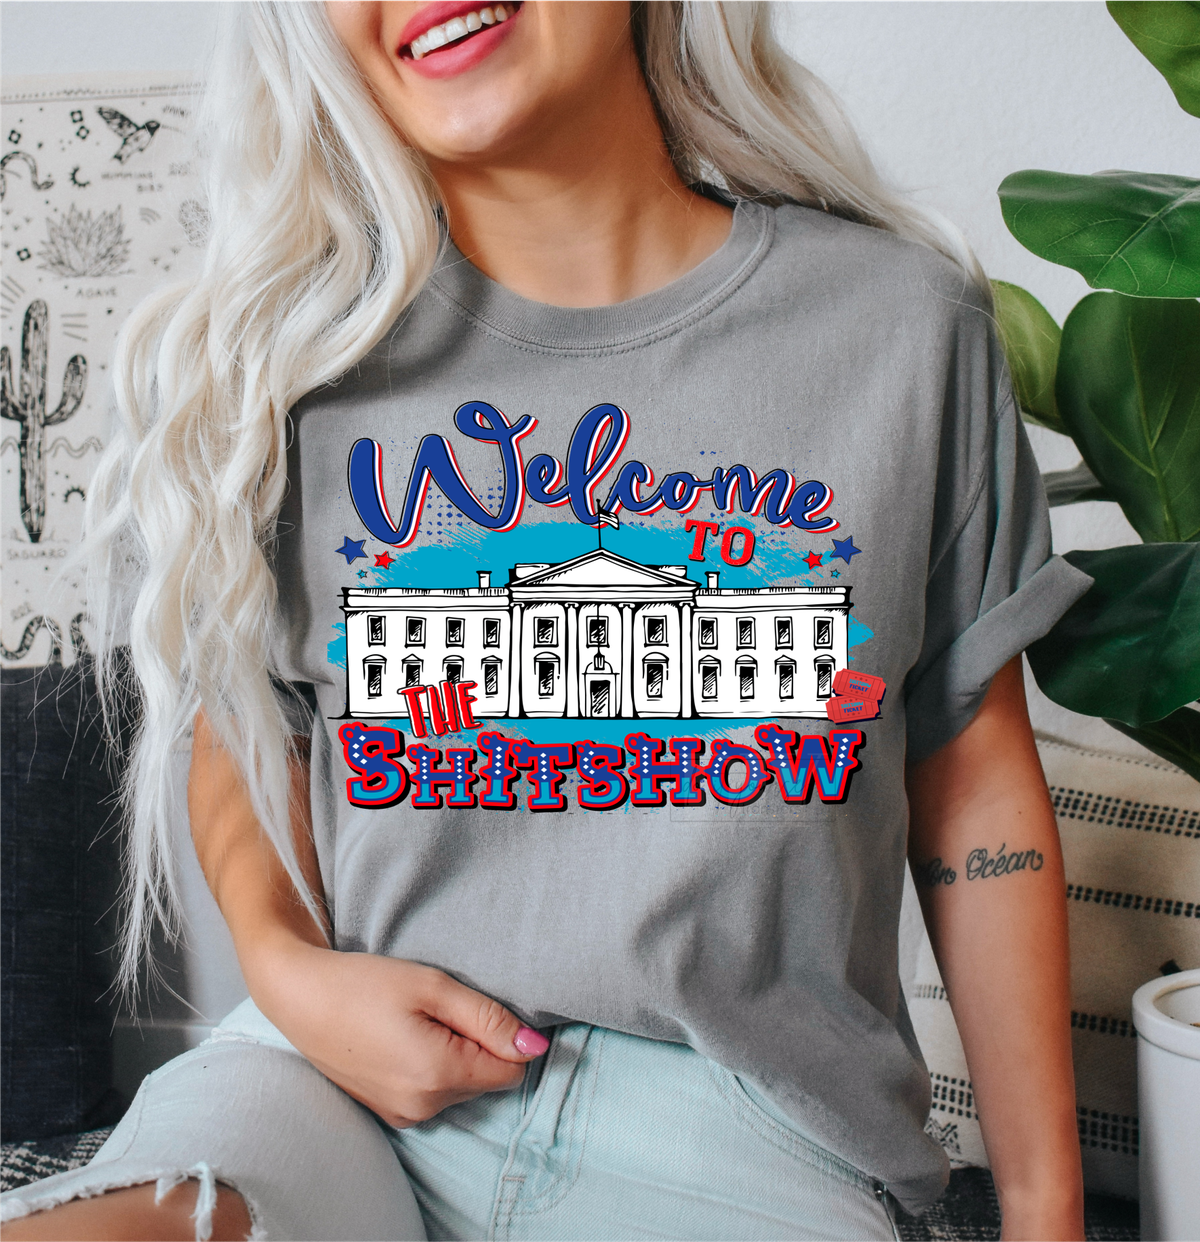 Welcome to the shitshow White House tickets  size ADULT  DTF TRANSFERPRINT TO ORDER